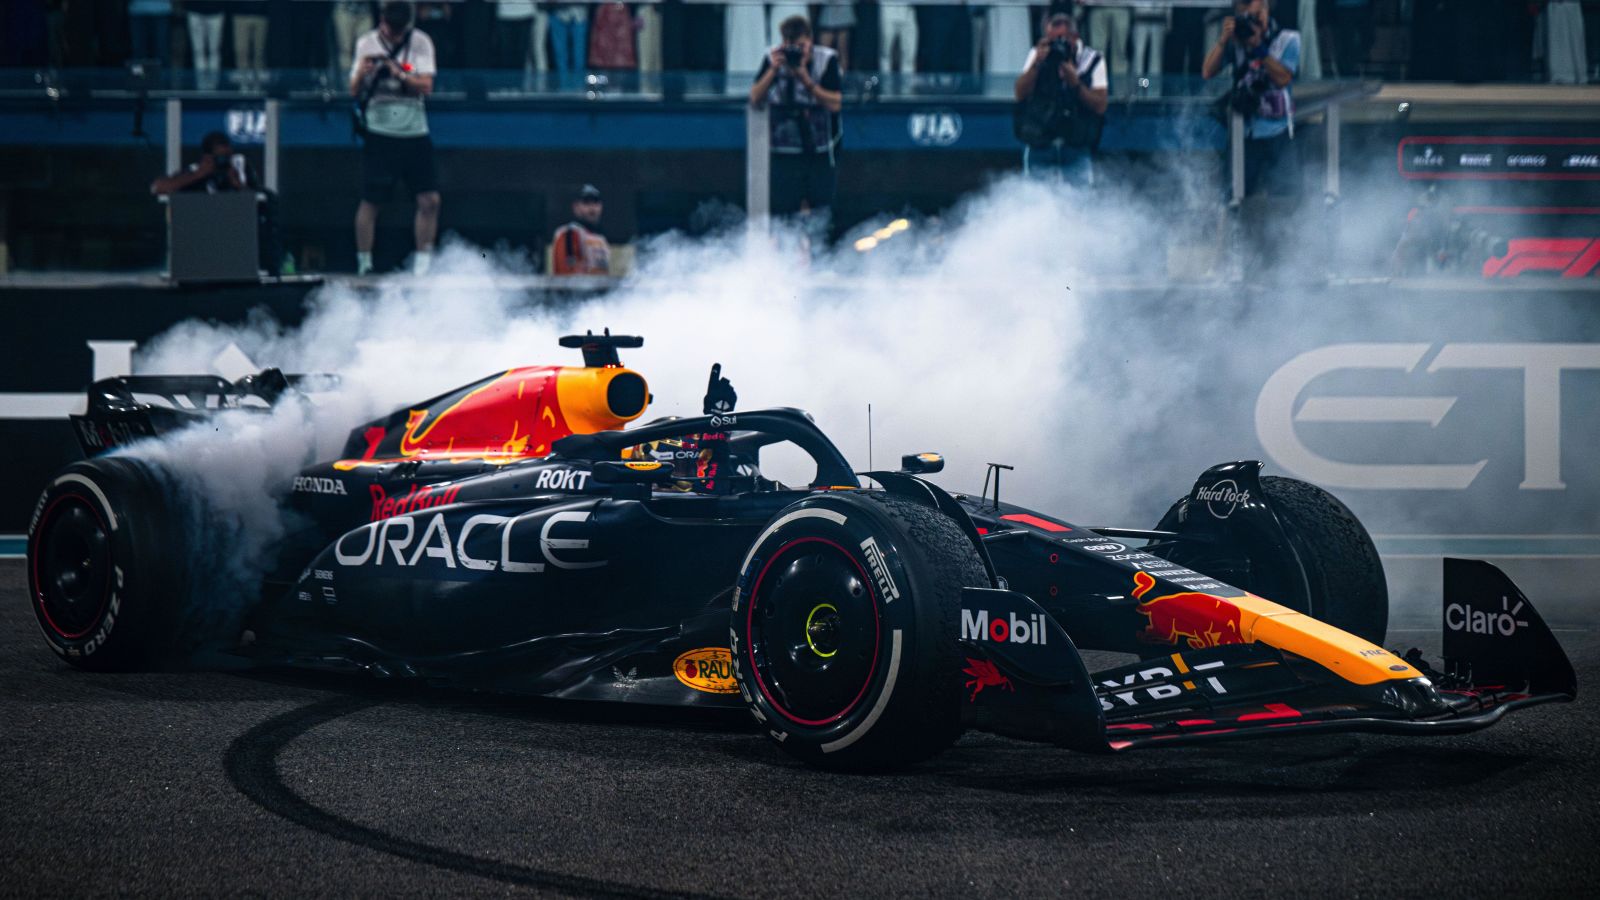 Red Bull and the magic of being F1 World Champions